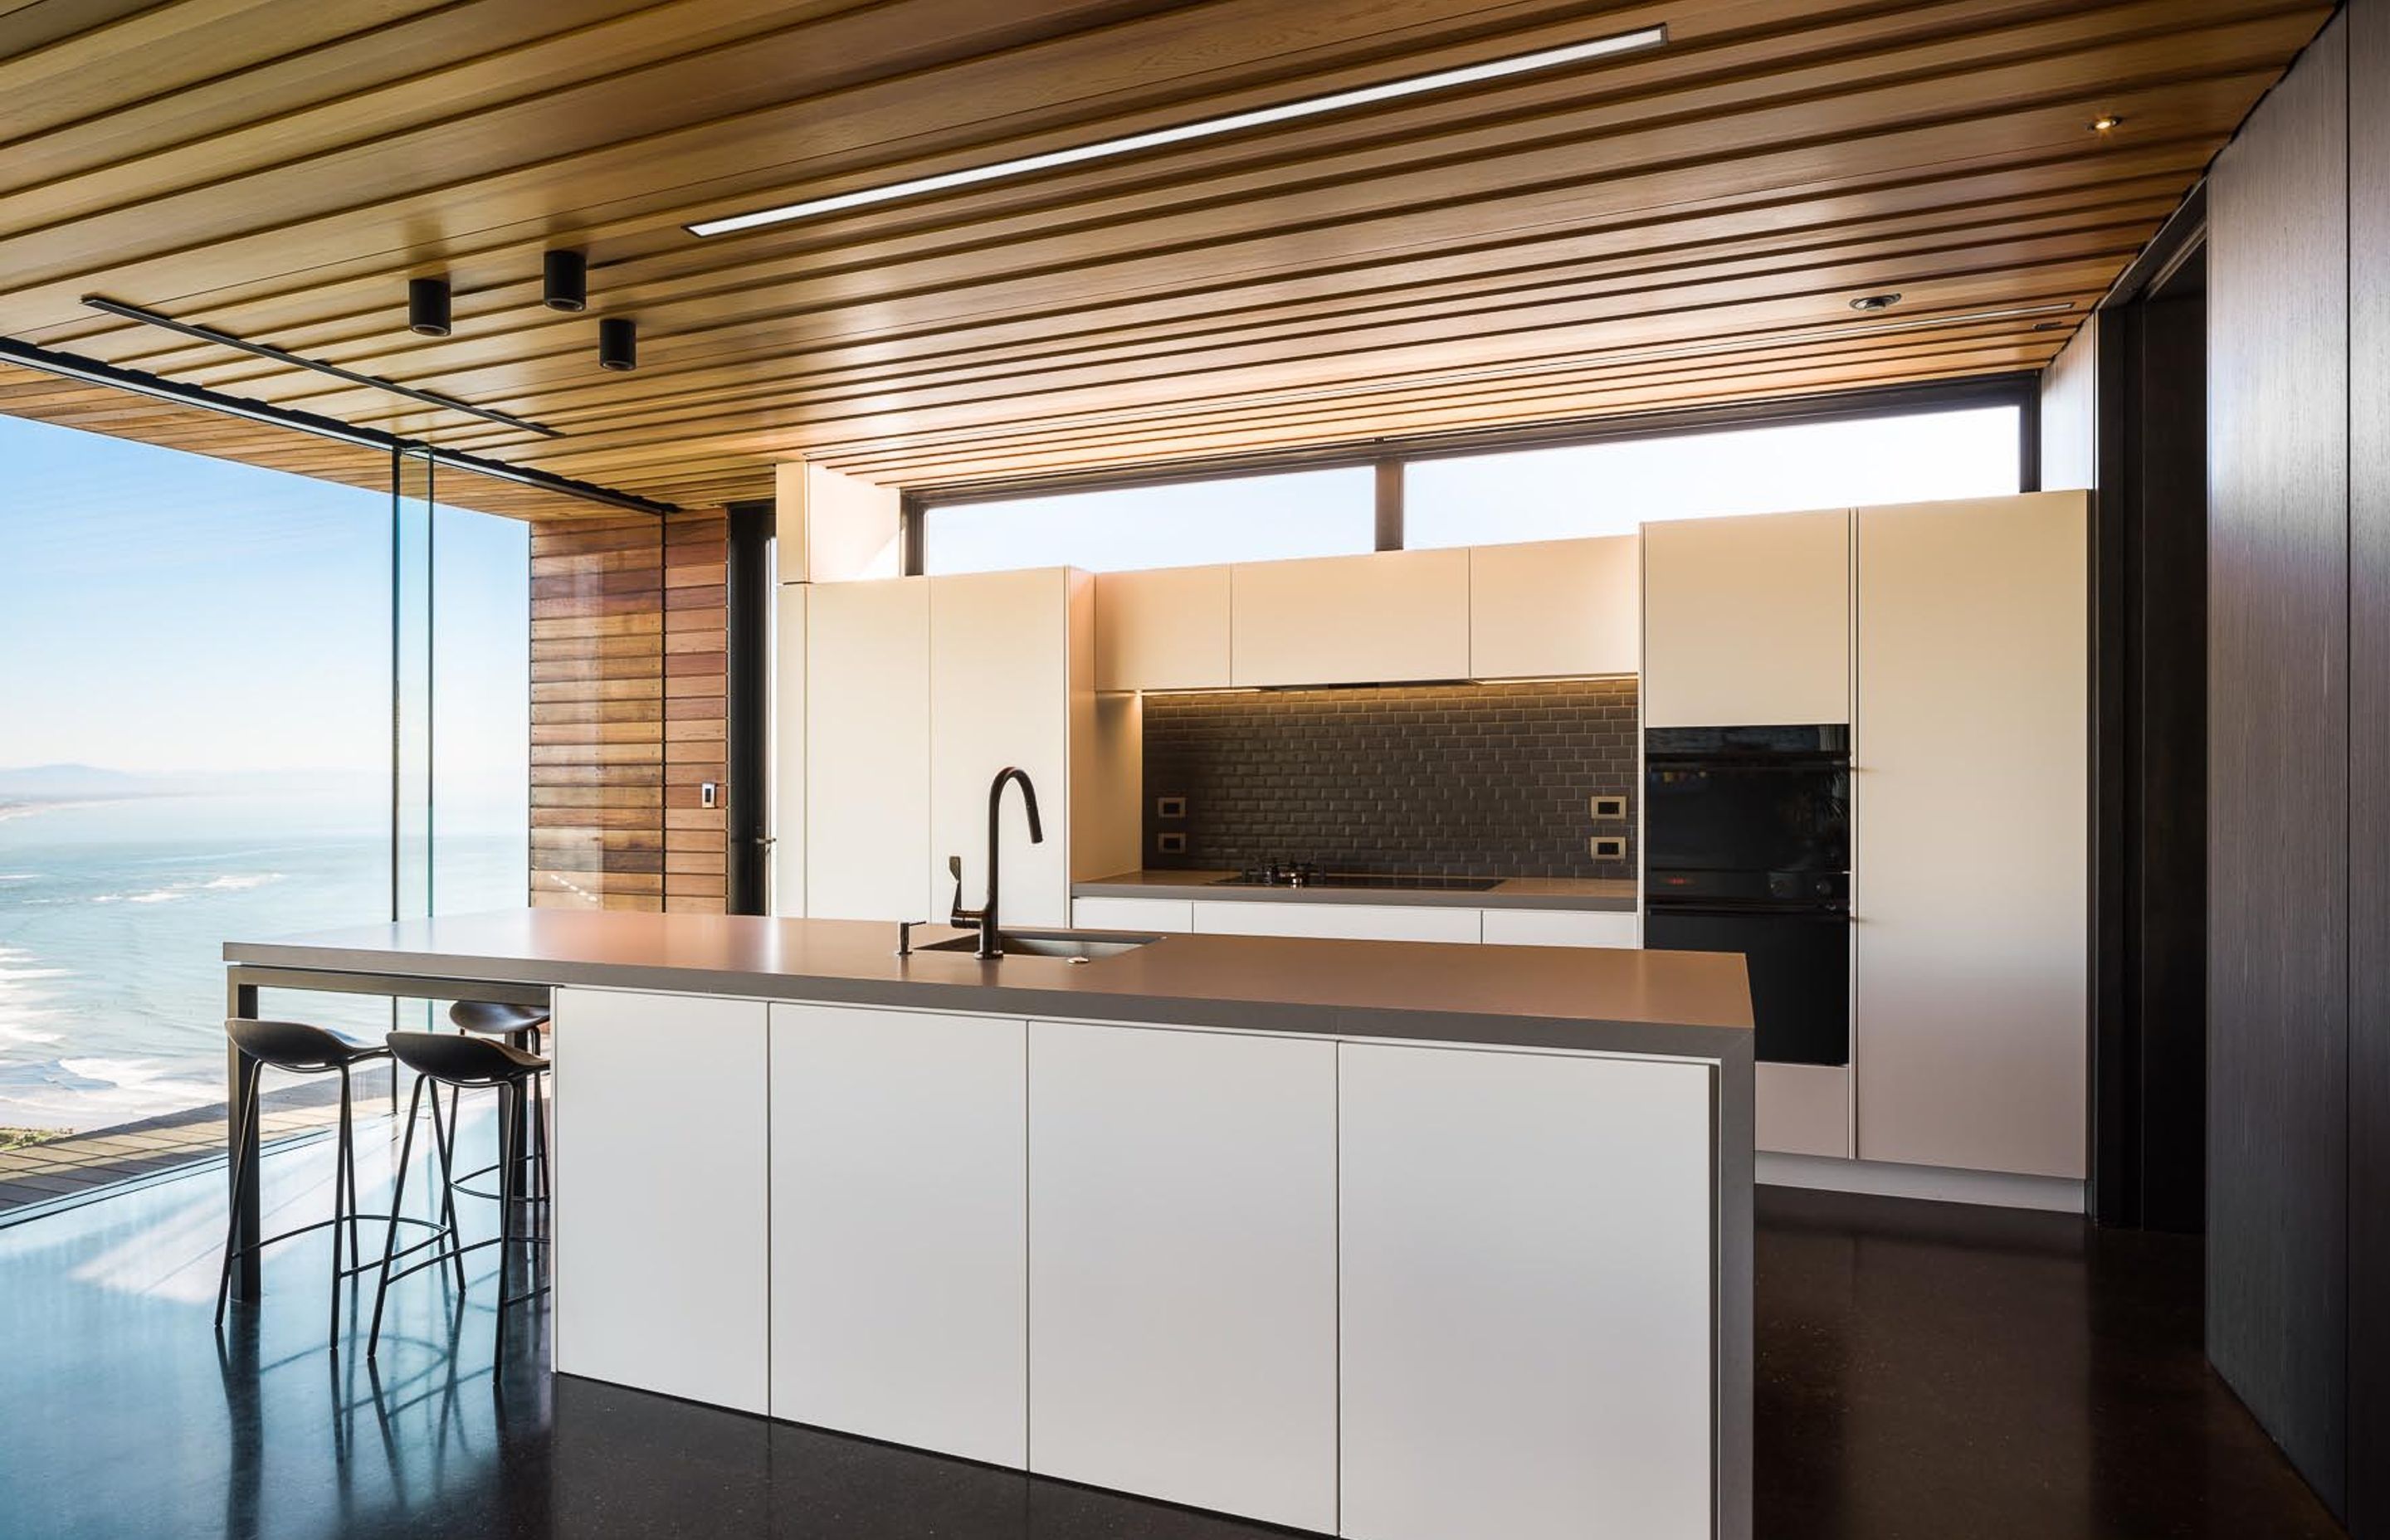 A monochromatic colour palette in the kitchen allows the view to take centre stage.